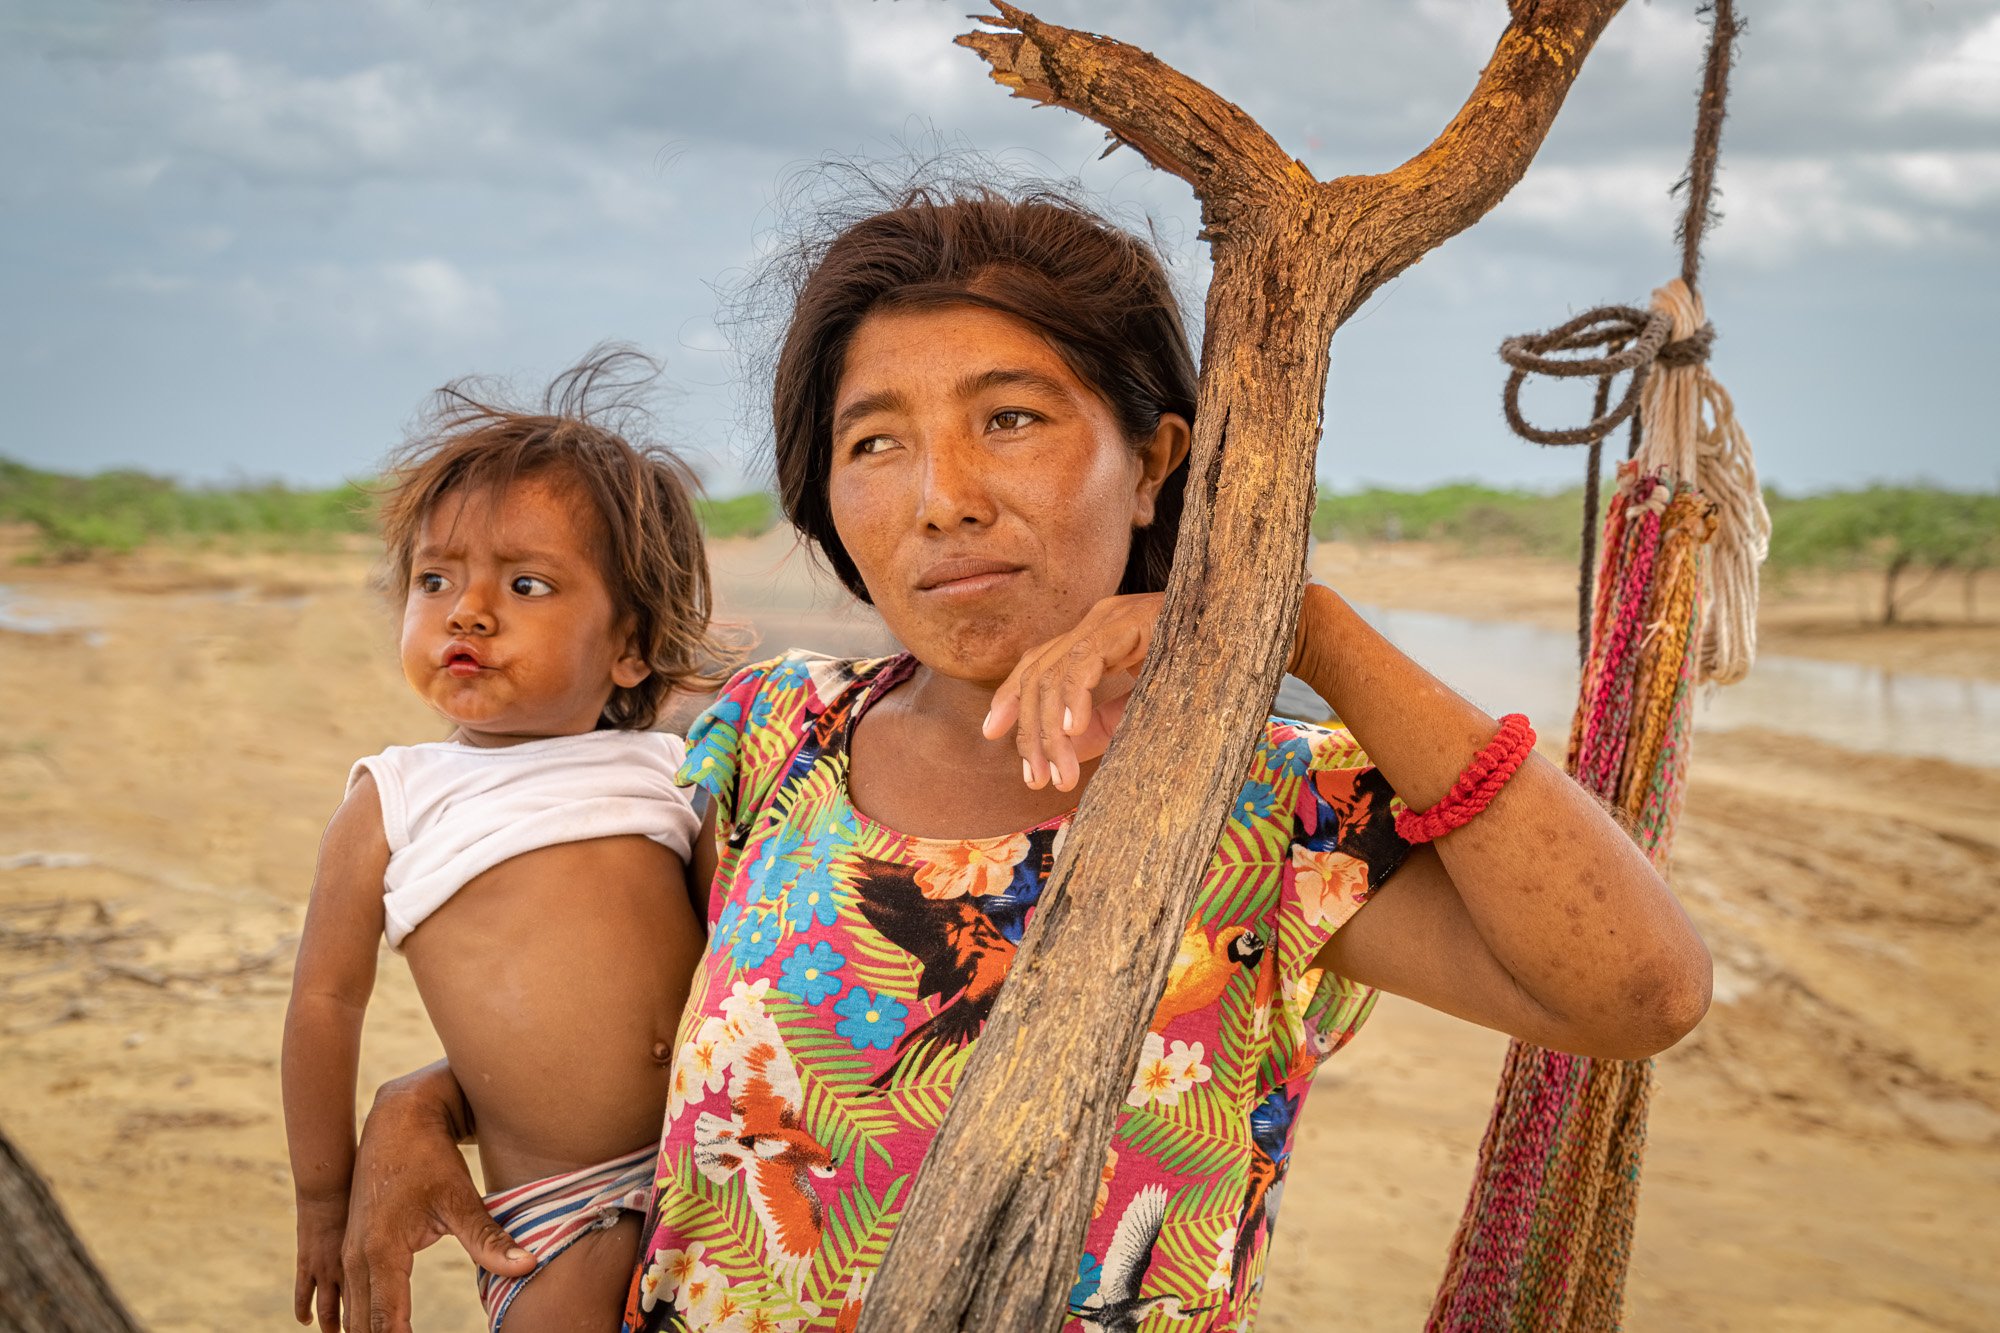    Wayuu Mother &amp; Child, Colombia    by Susan Lawi  